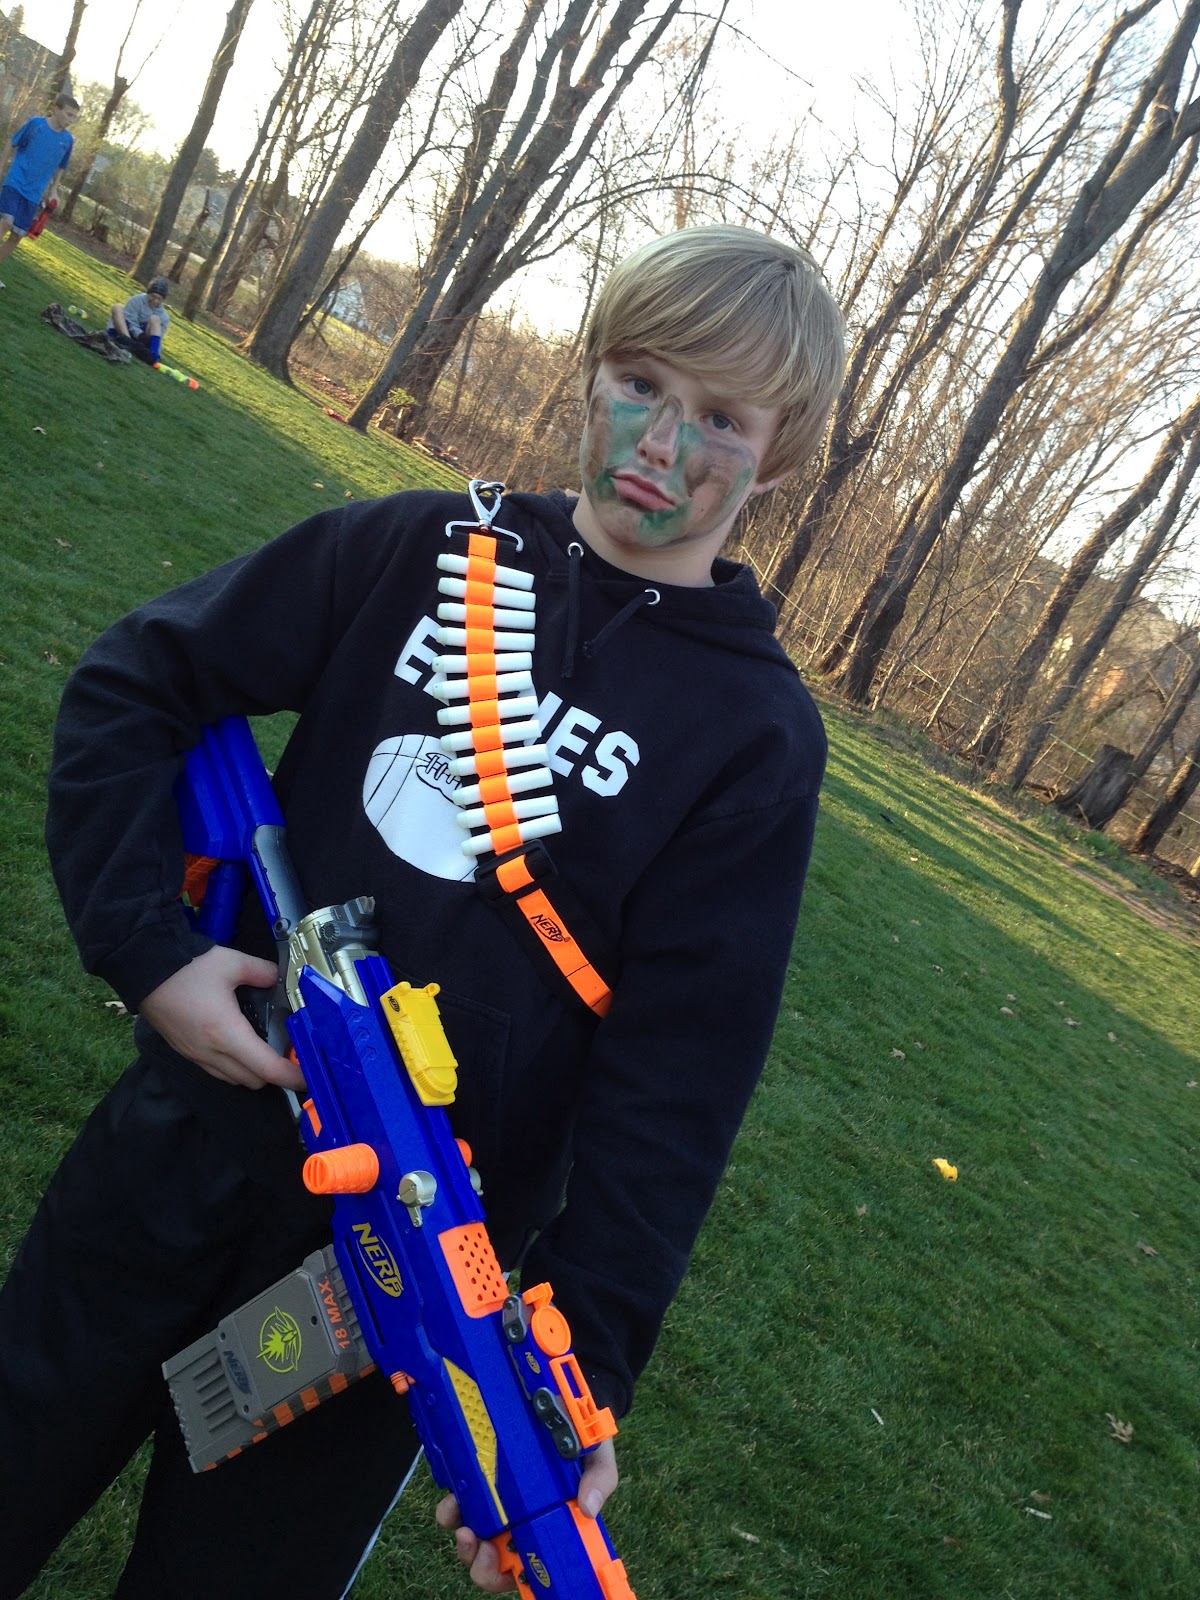 merry me events: Glow-in-the-dark Nerf Battle Birthday Party